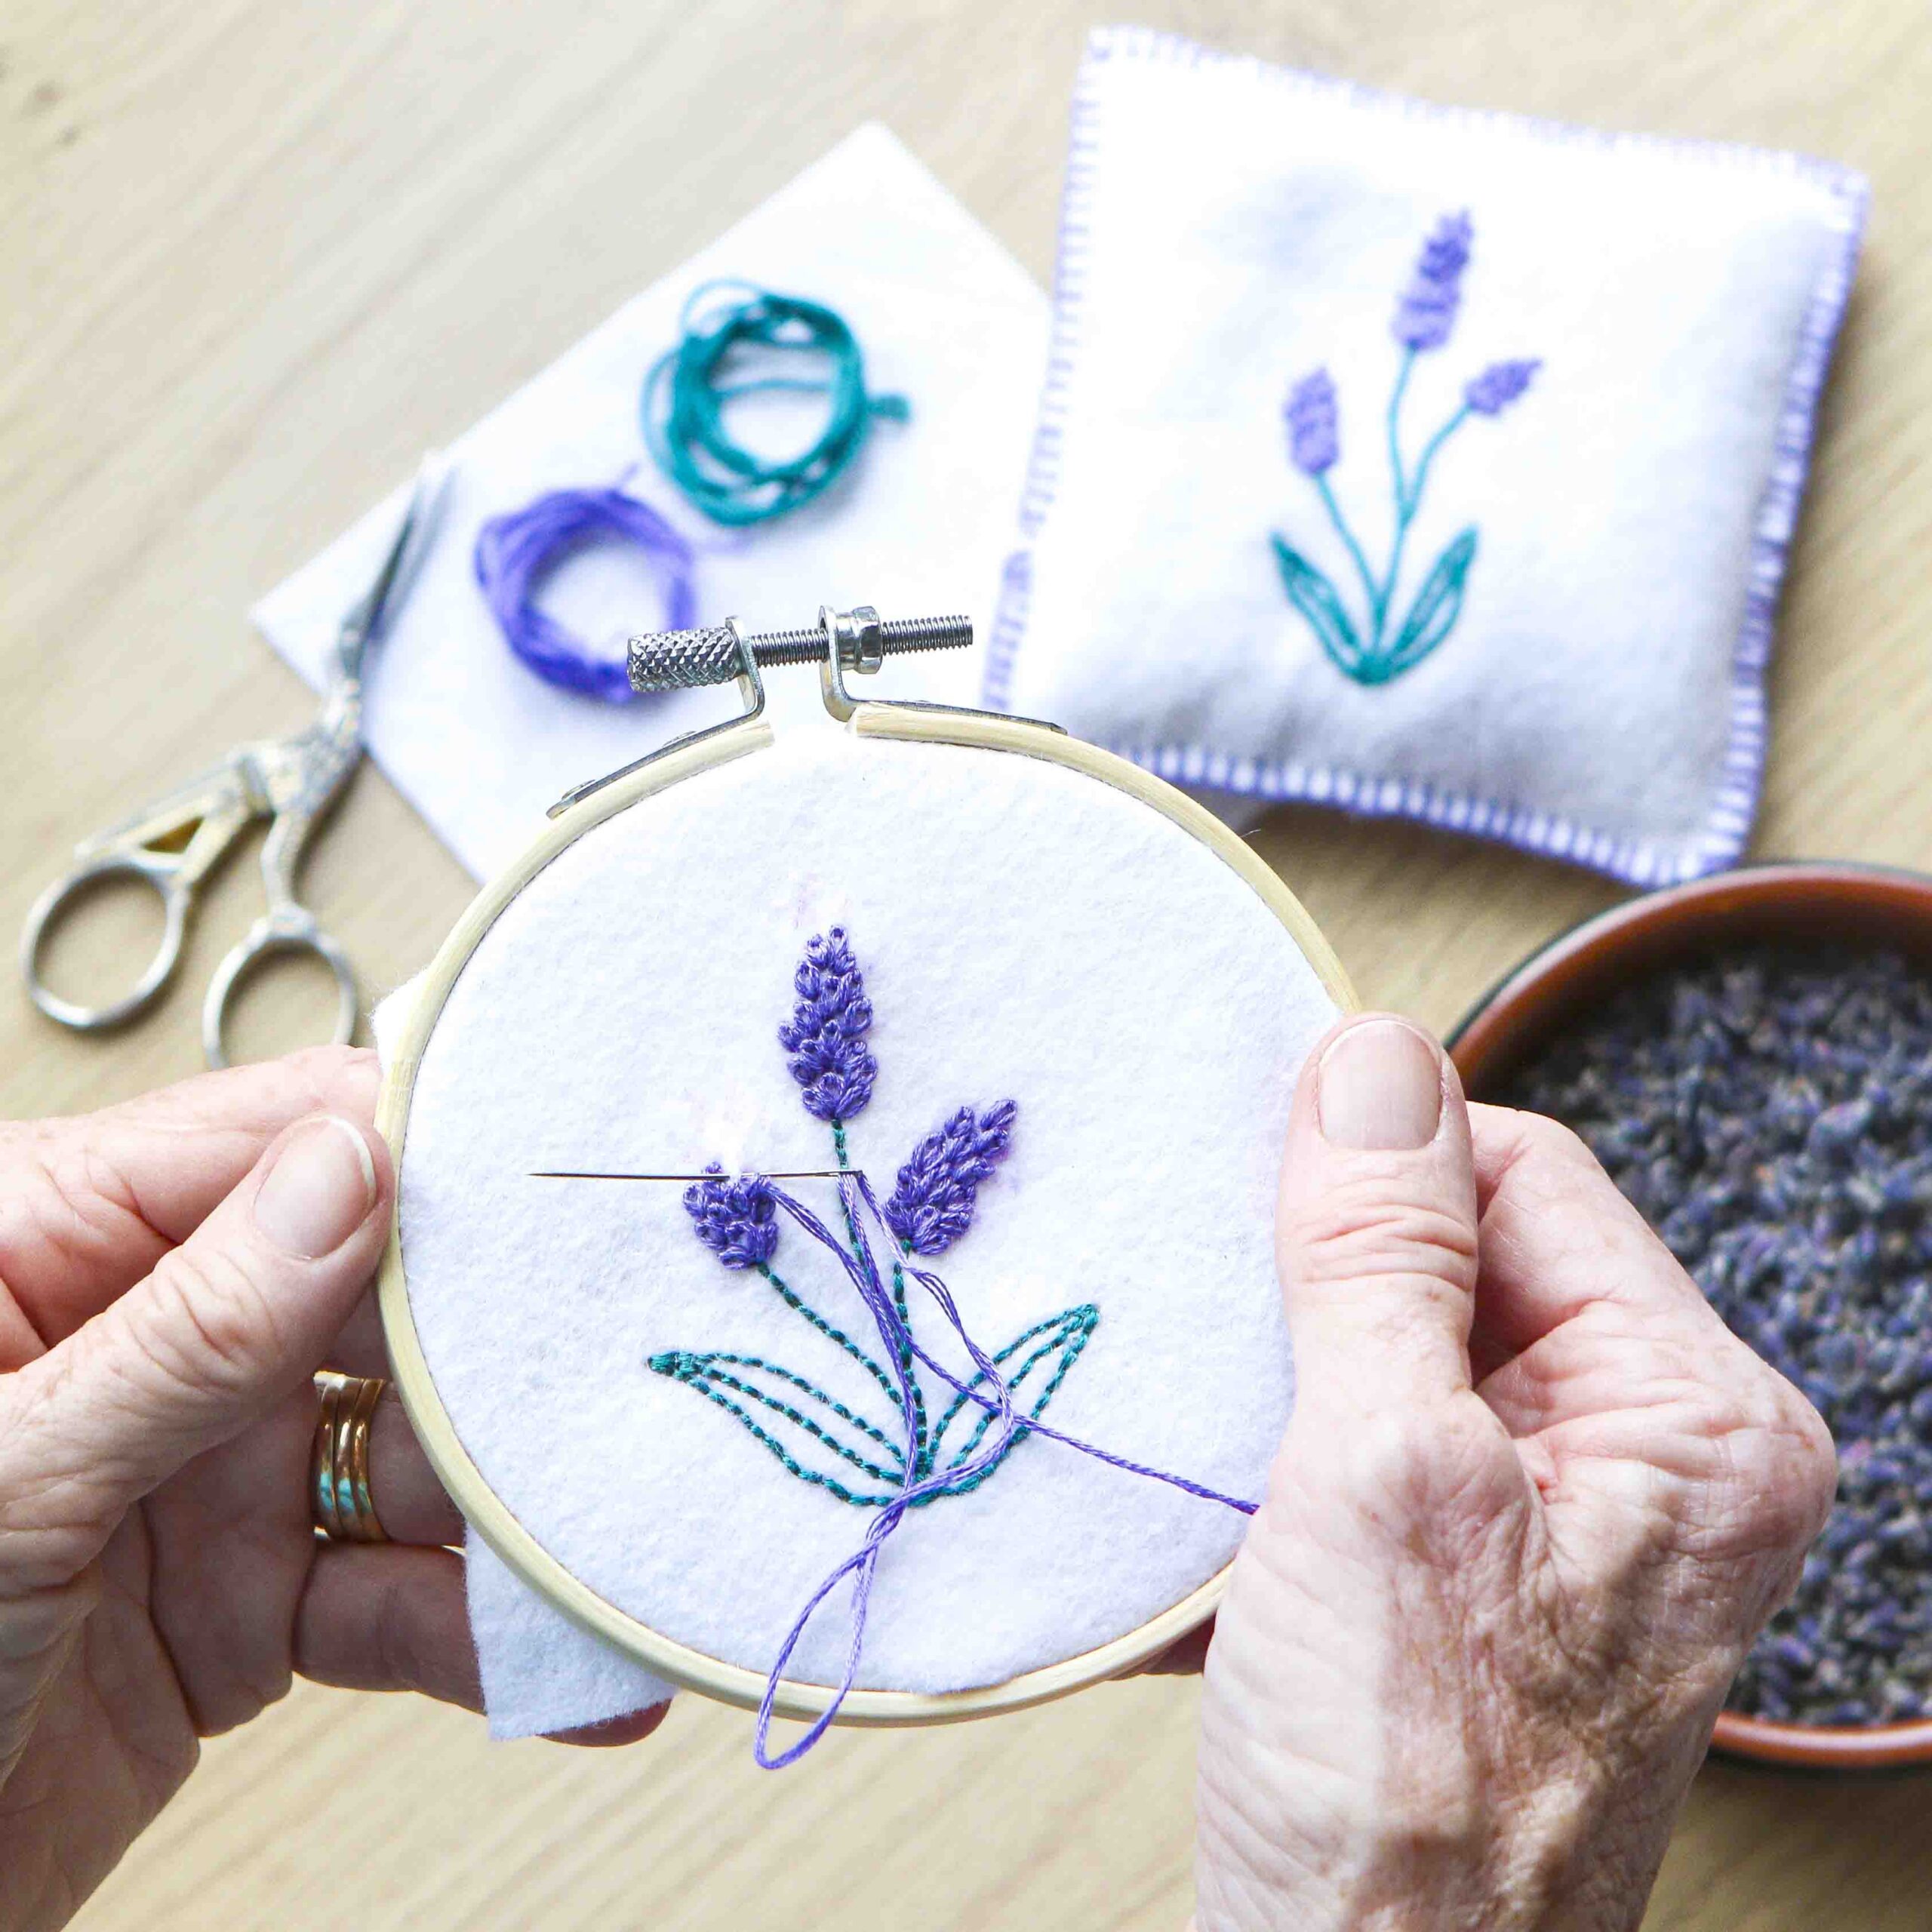 diy hand embroidered lavender bags